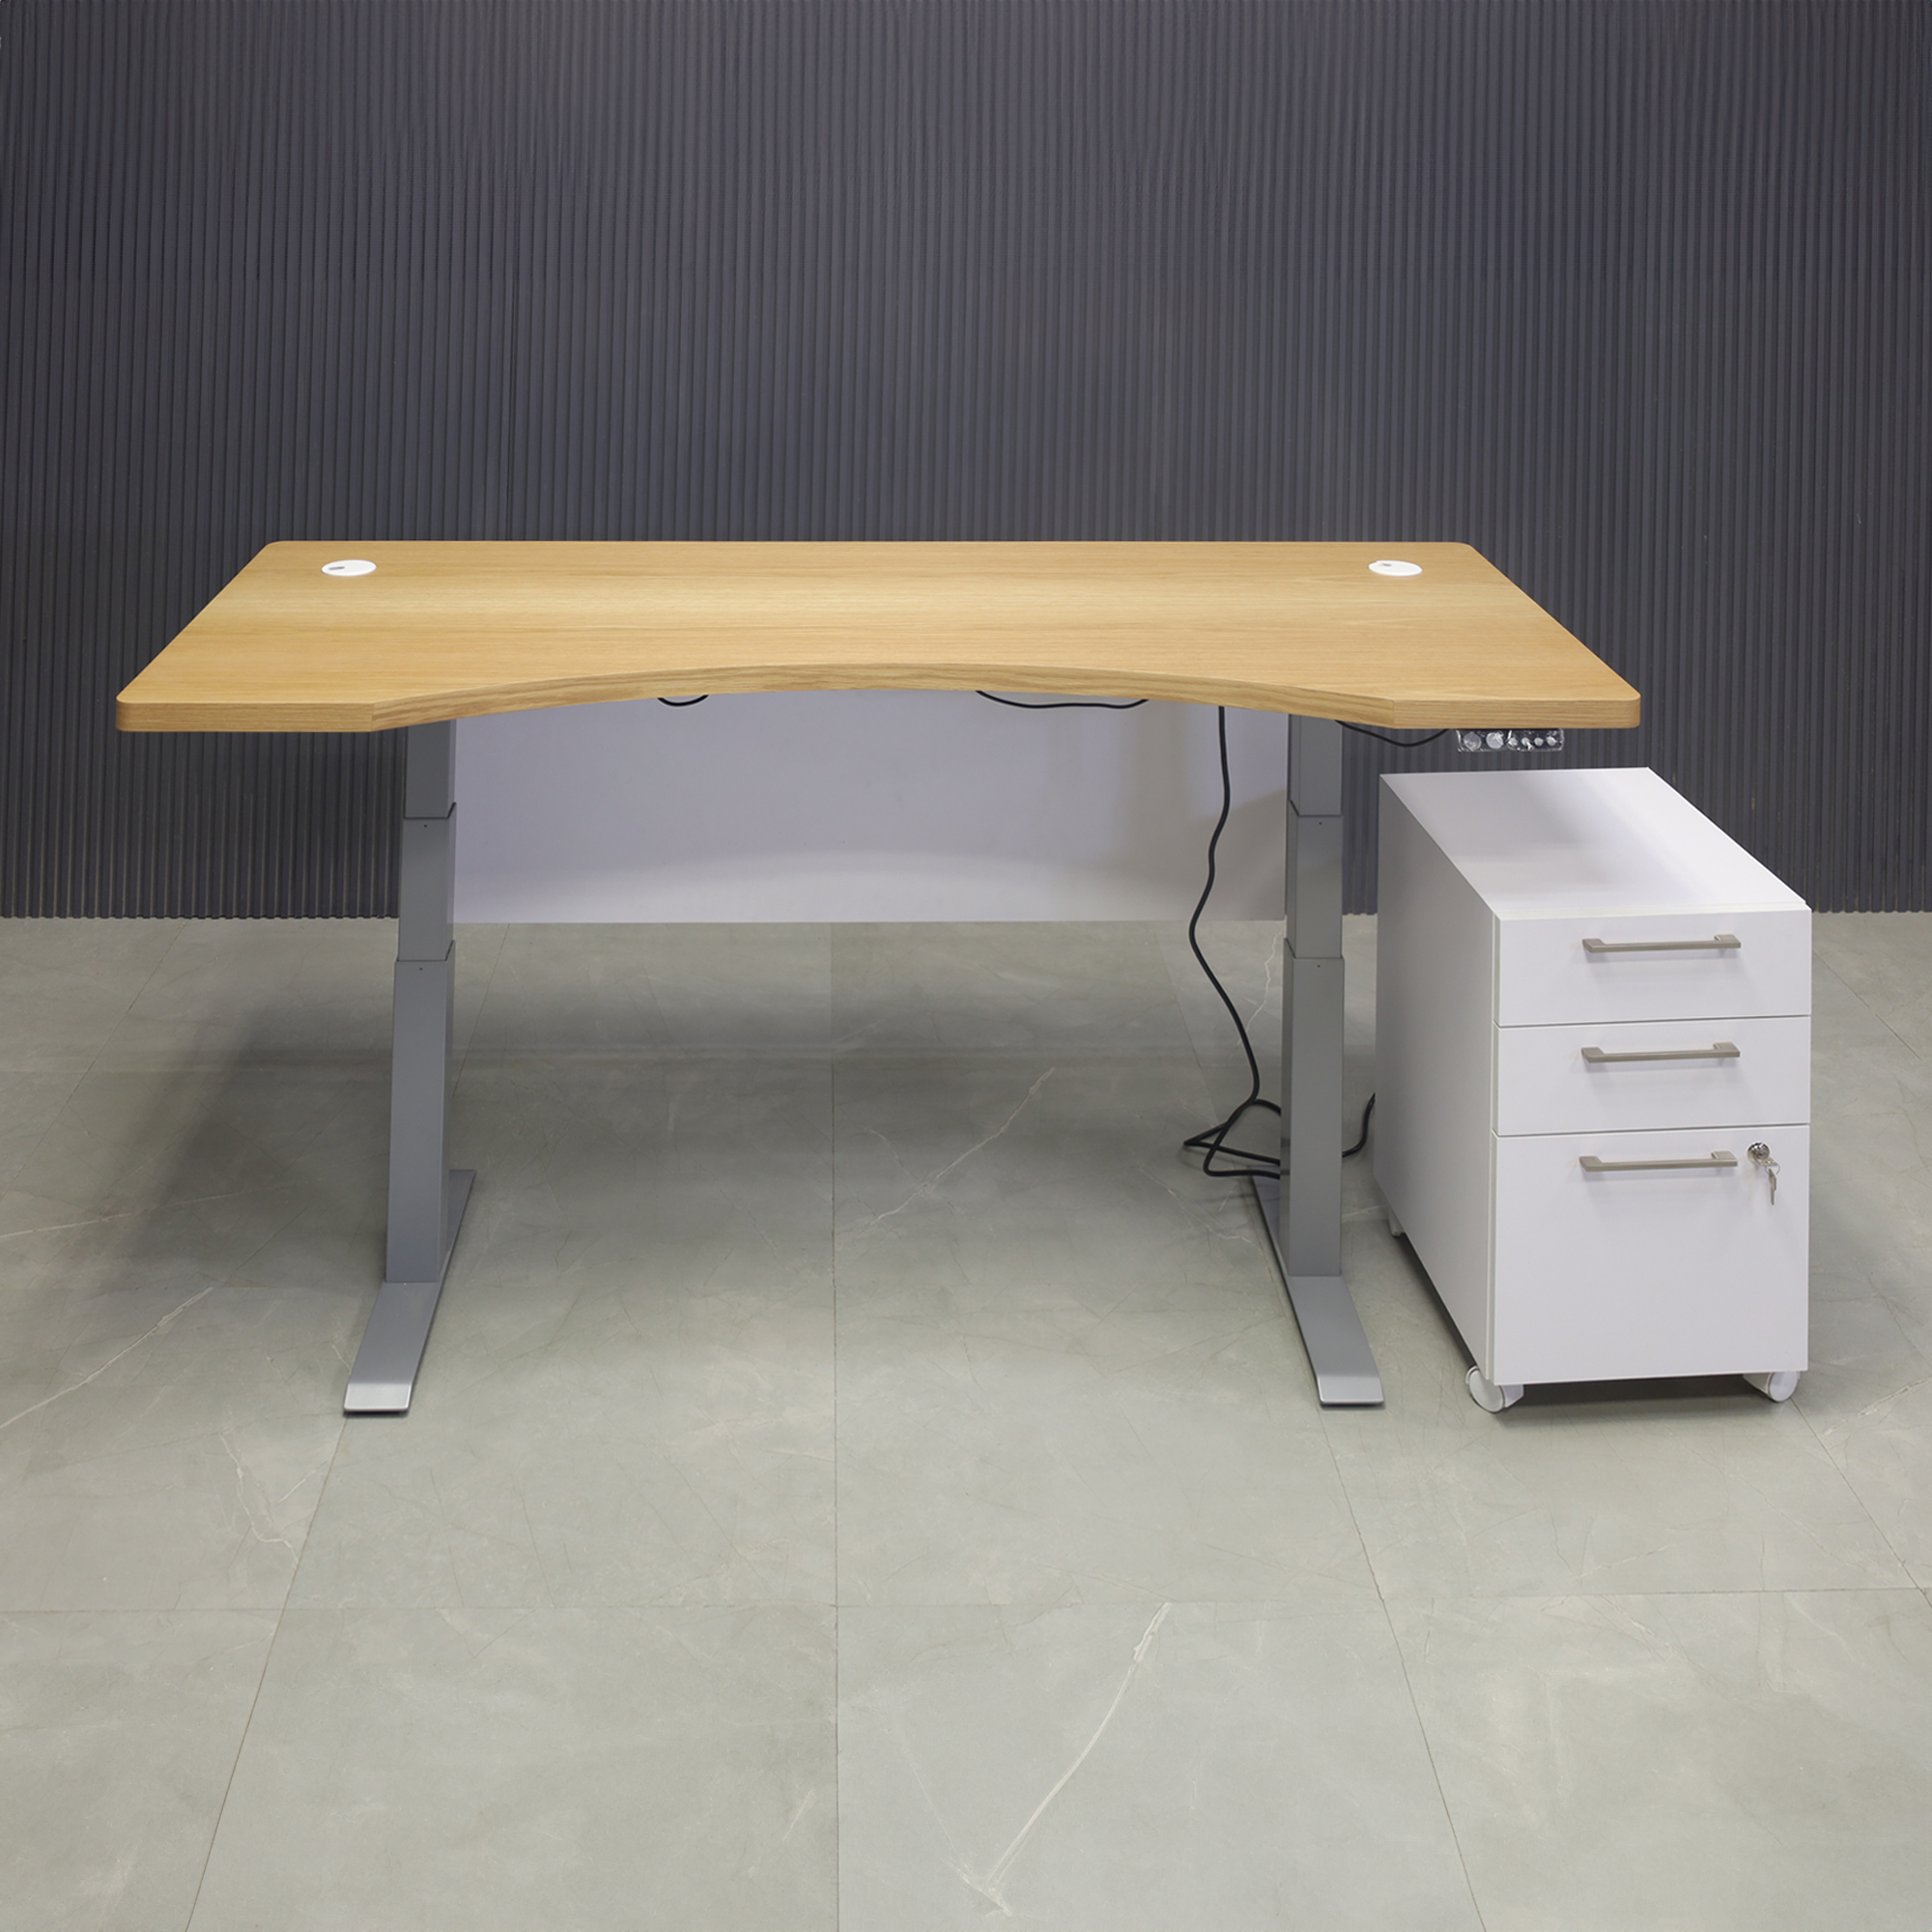 72-inch aXis Sit-stand Executive Desk with white oak veneer laminate top, white matte laminate privacy panel and silver metal legs, shown here.